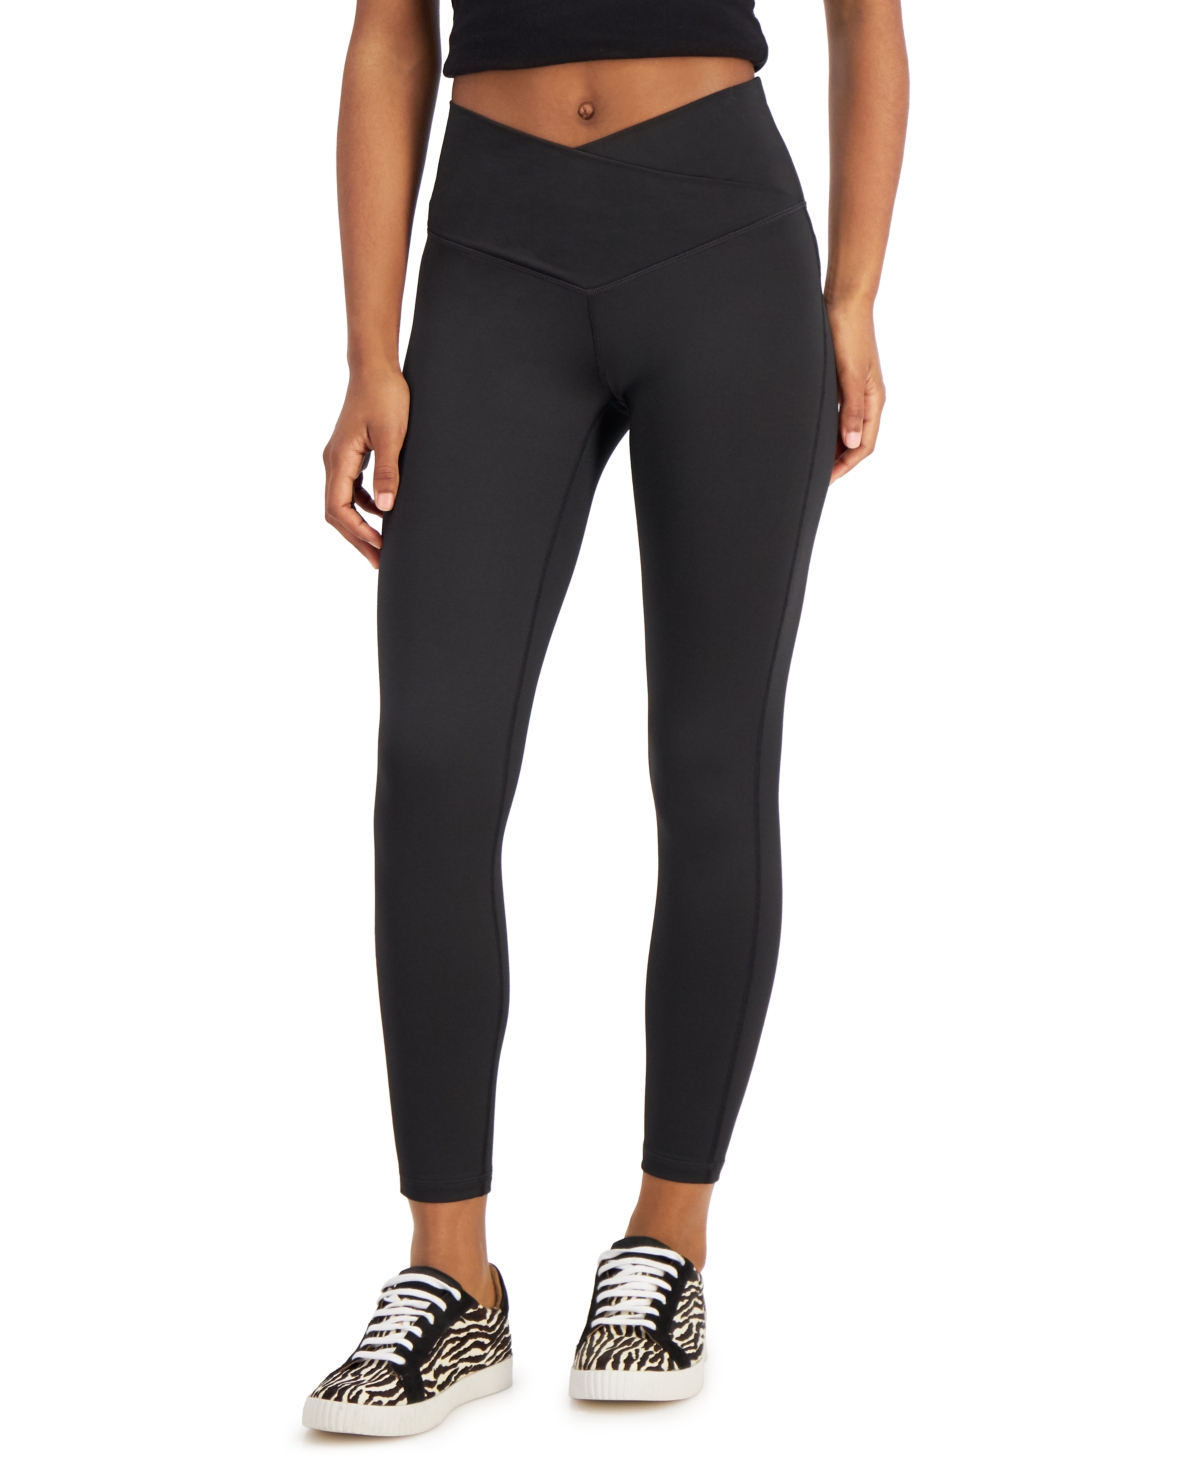 Jenni On Repeat Crossover-Waist 7/8th Length Legging, Created for Macy's